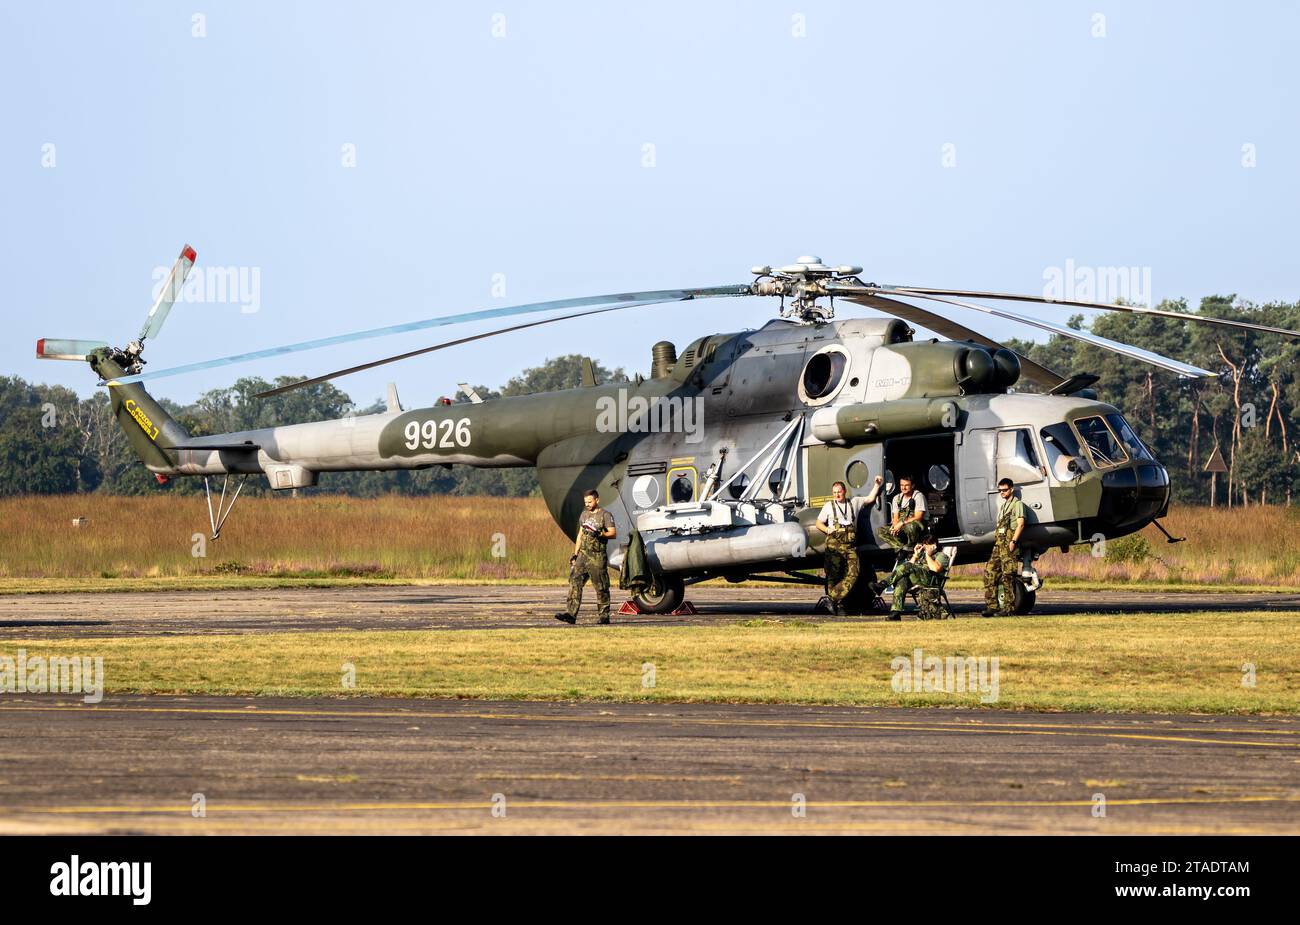 Czech Republic Air Force Mil Mi-171Sh transport and attack helicopter at Kleine-Brogel Air Base, Belgium - September 13, 2021 Stock Photo